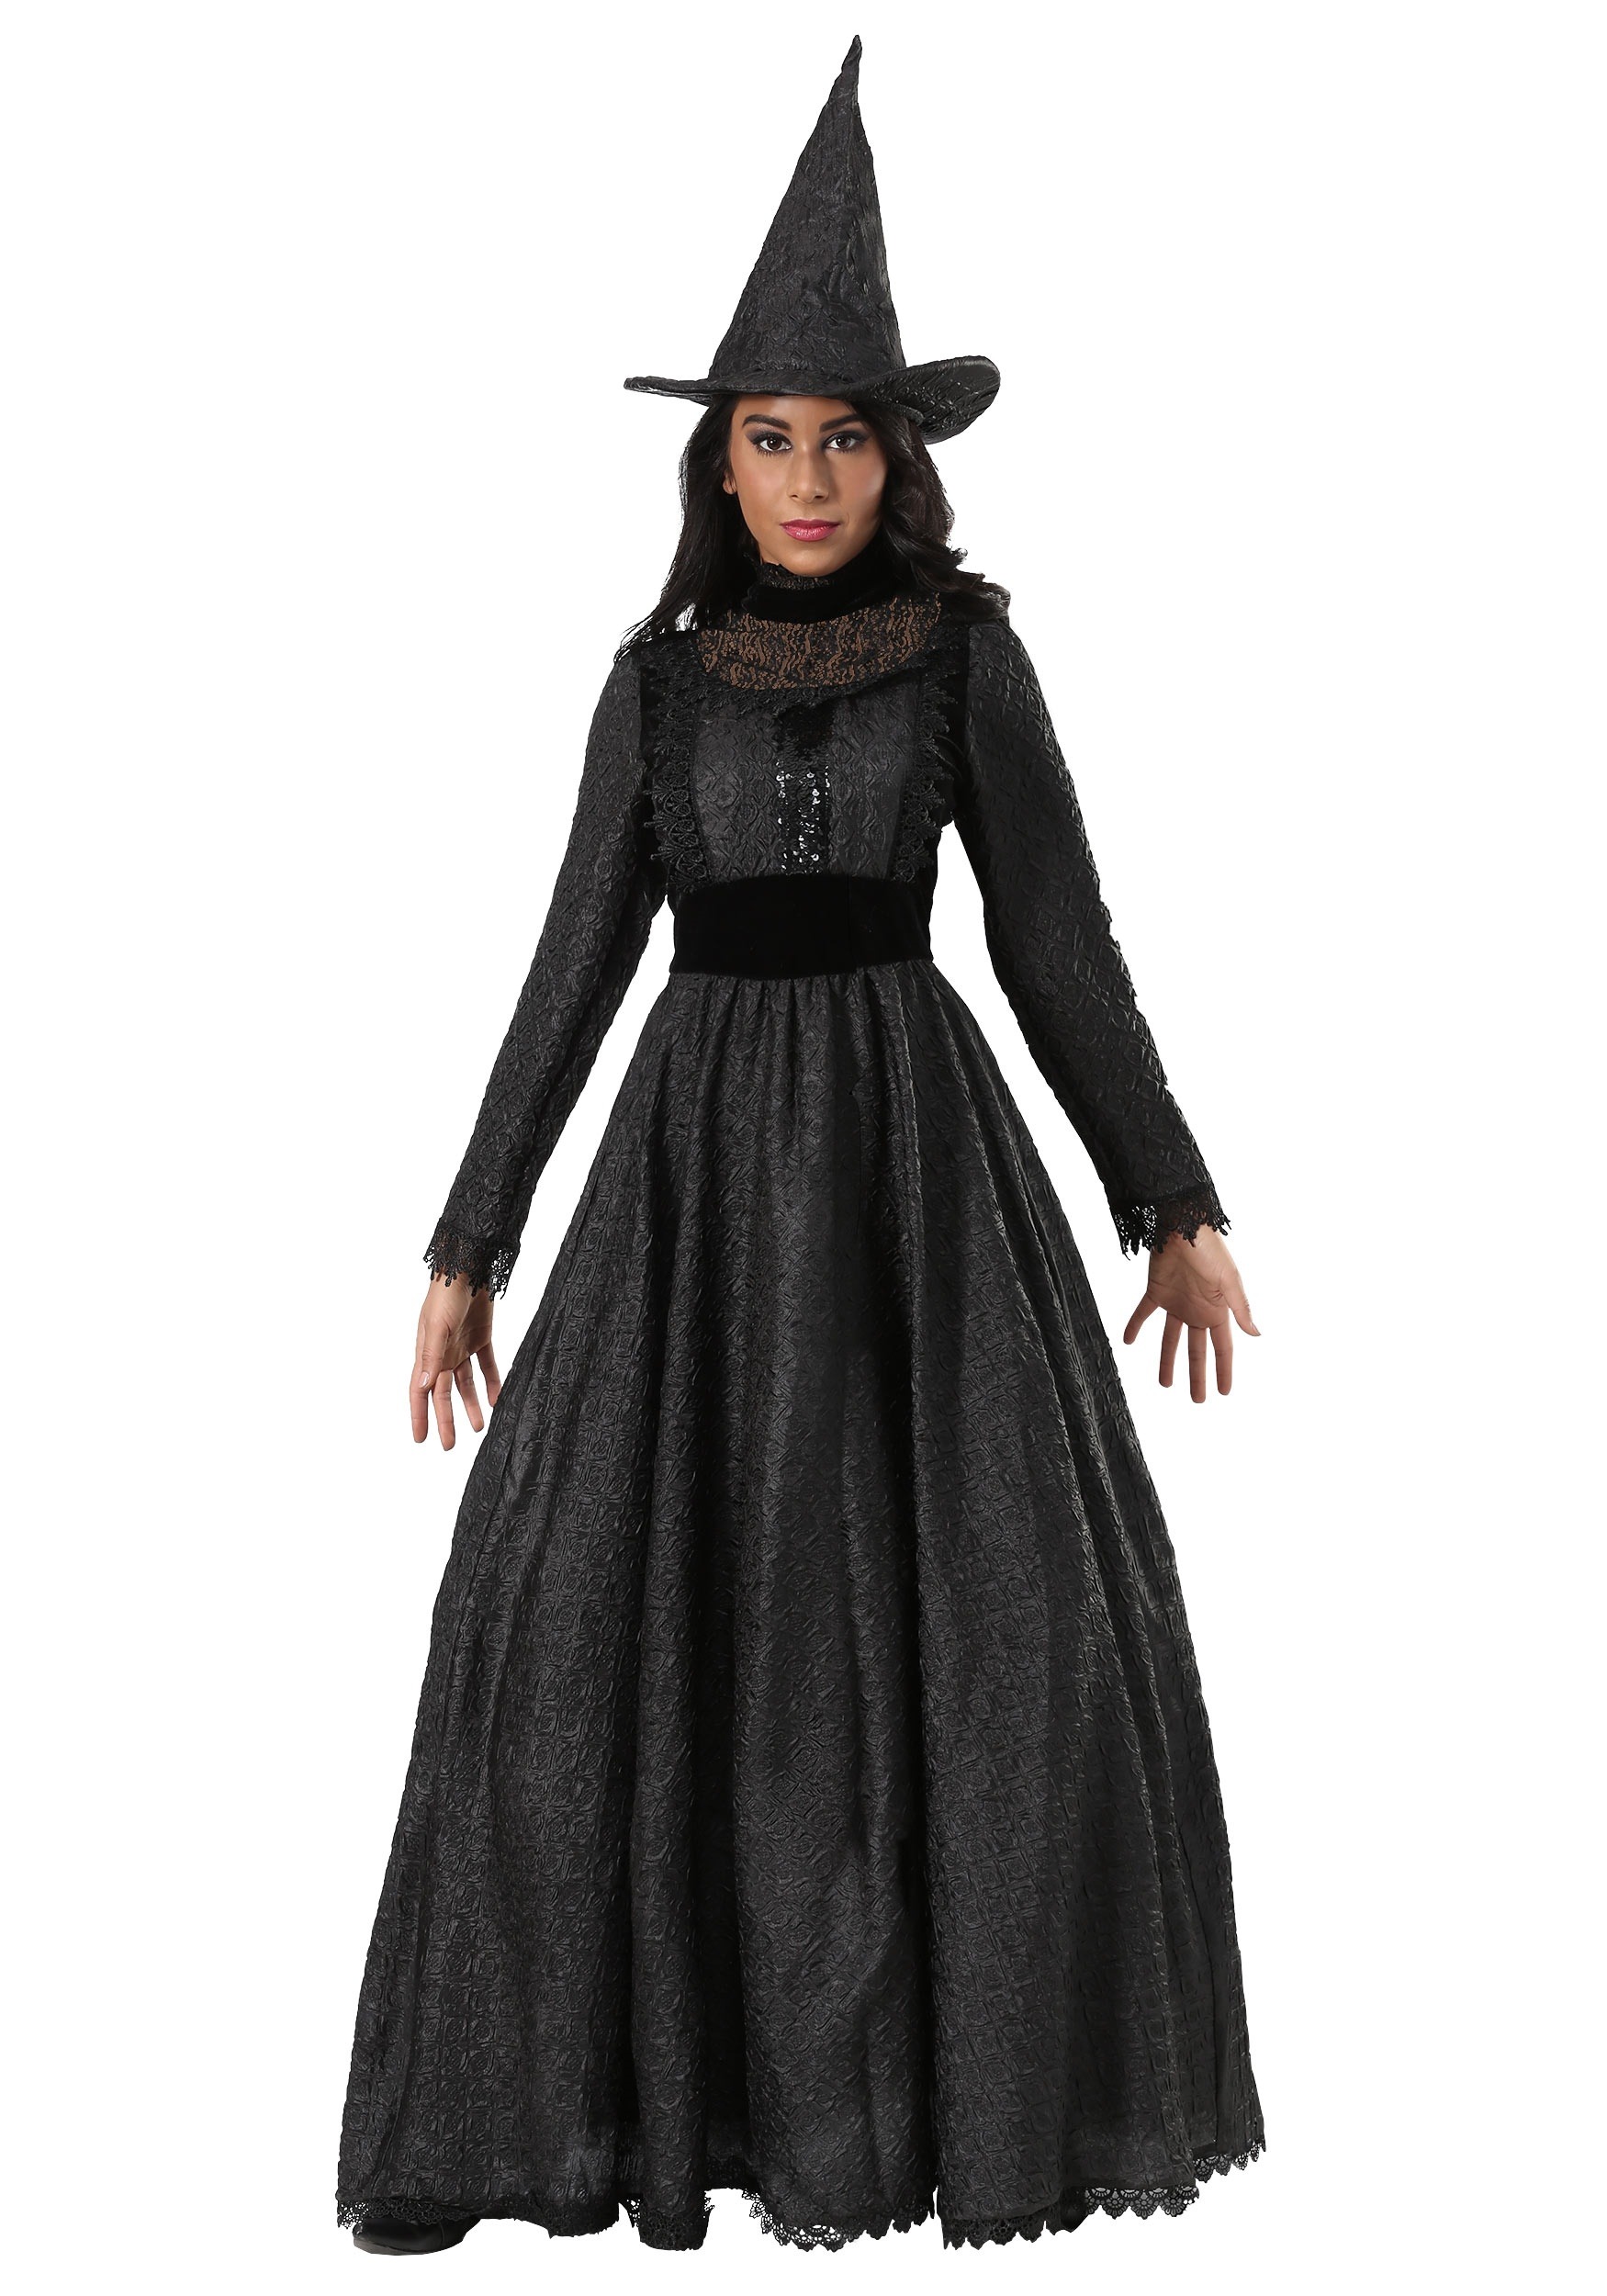 Image of Deluxe Plus Size Dark Witch Costume for Women ID FUN6695PL-1X